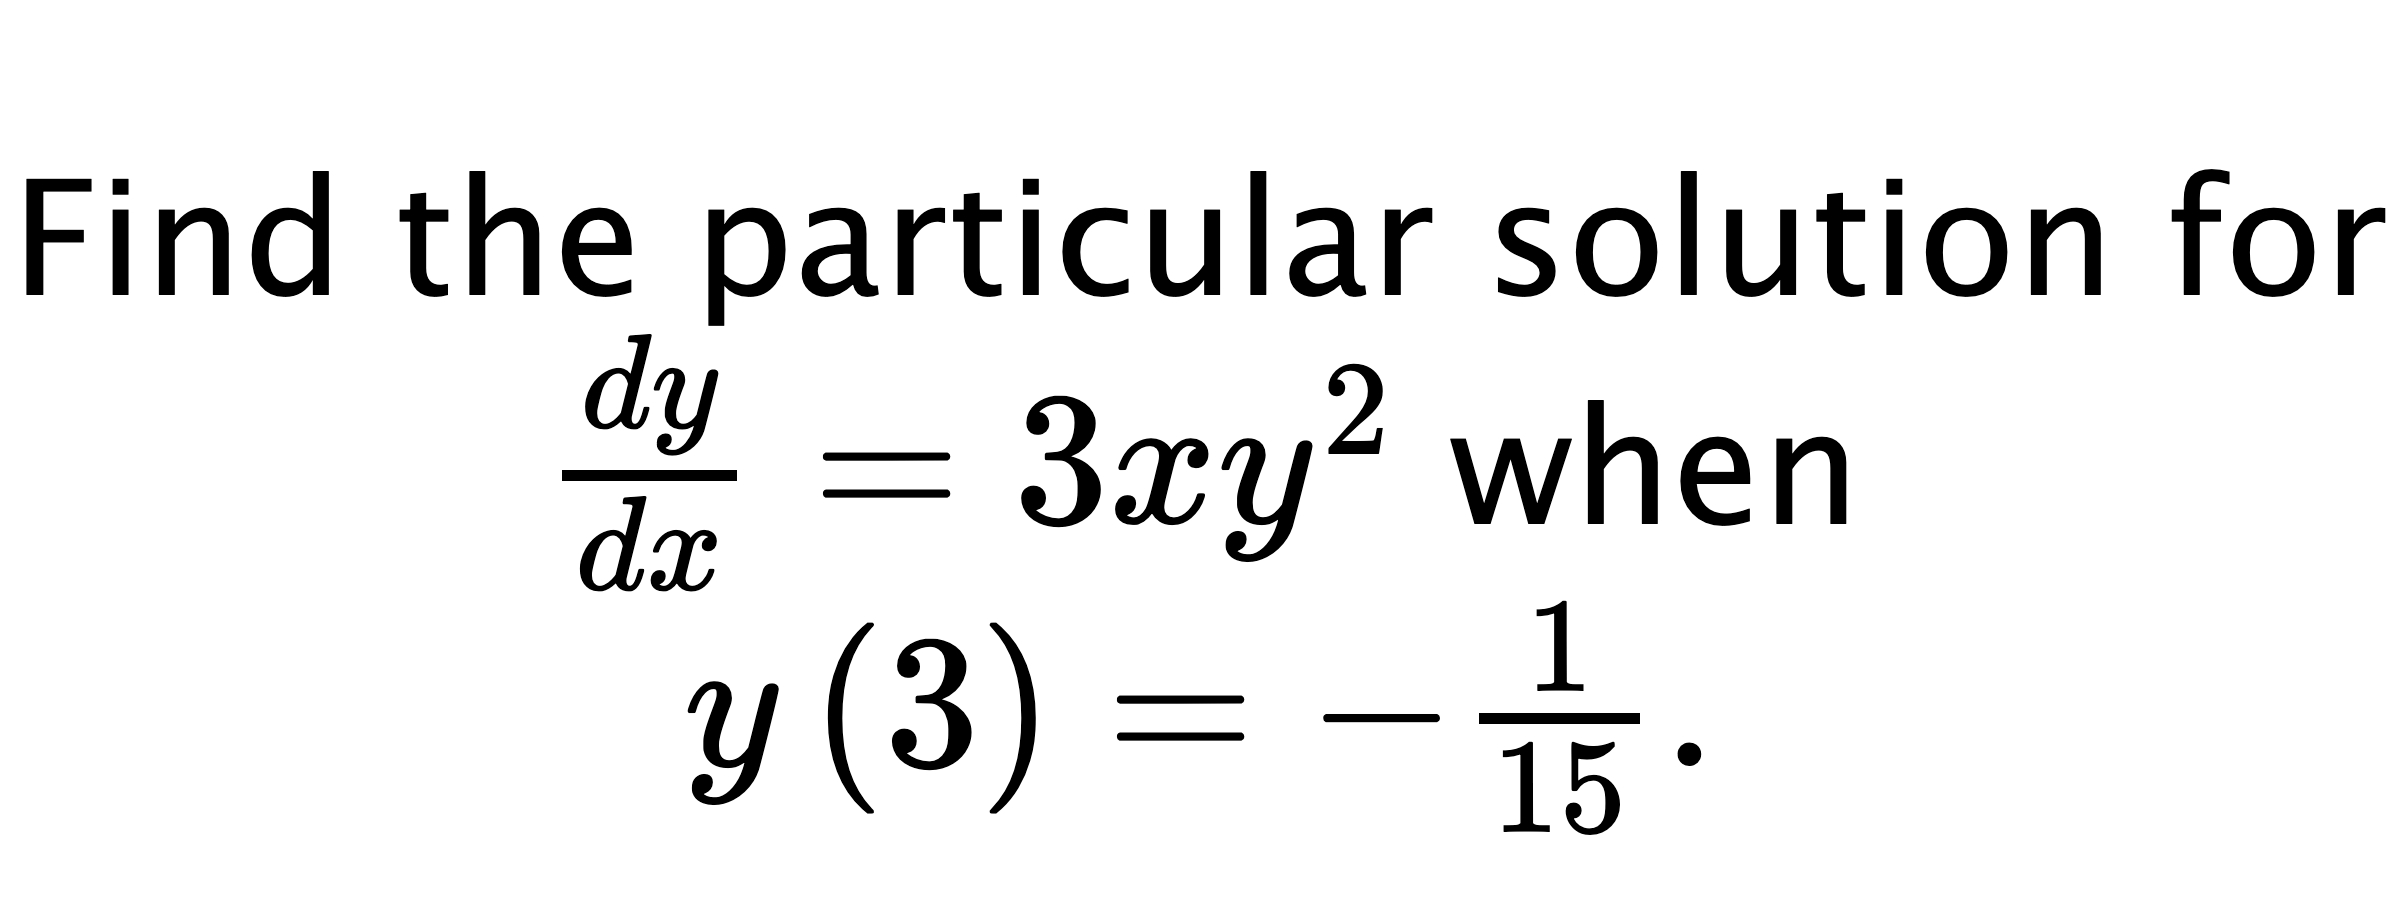  Find the particular solution for $ \frac{dy}{dx}=3xy^{2} $ when $ y\left( 3 \right)=-\frac{1}{15}. $